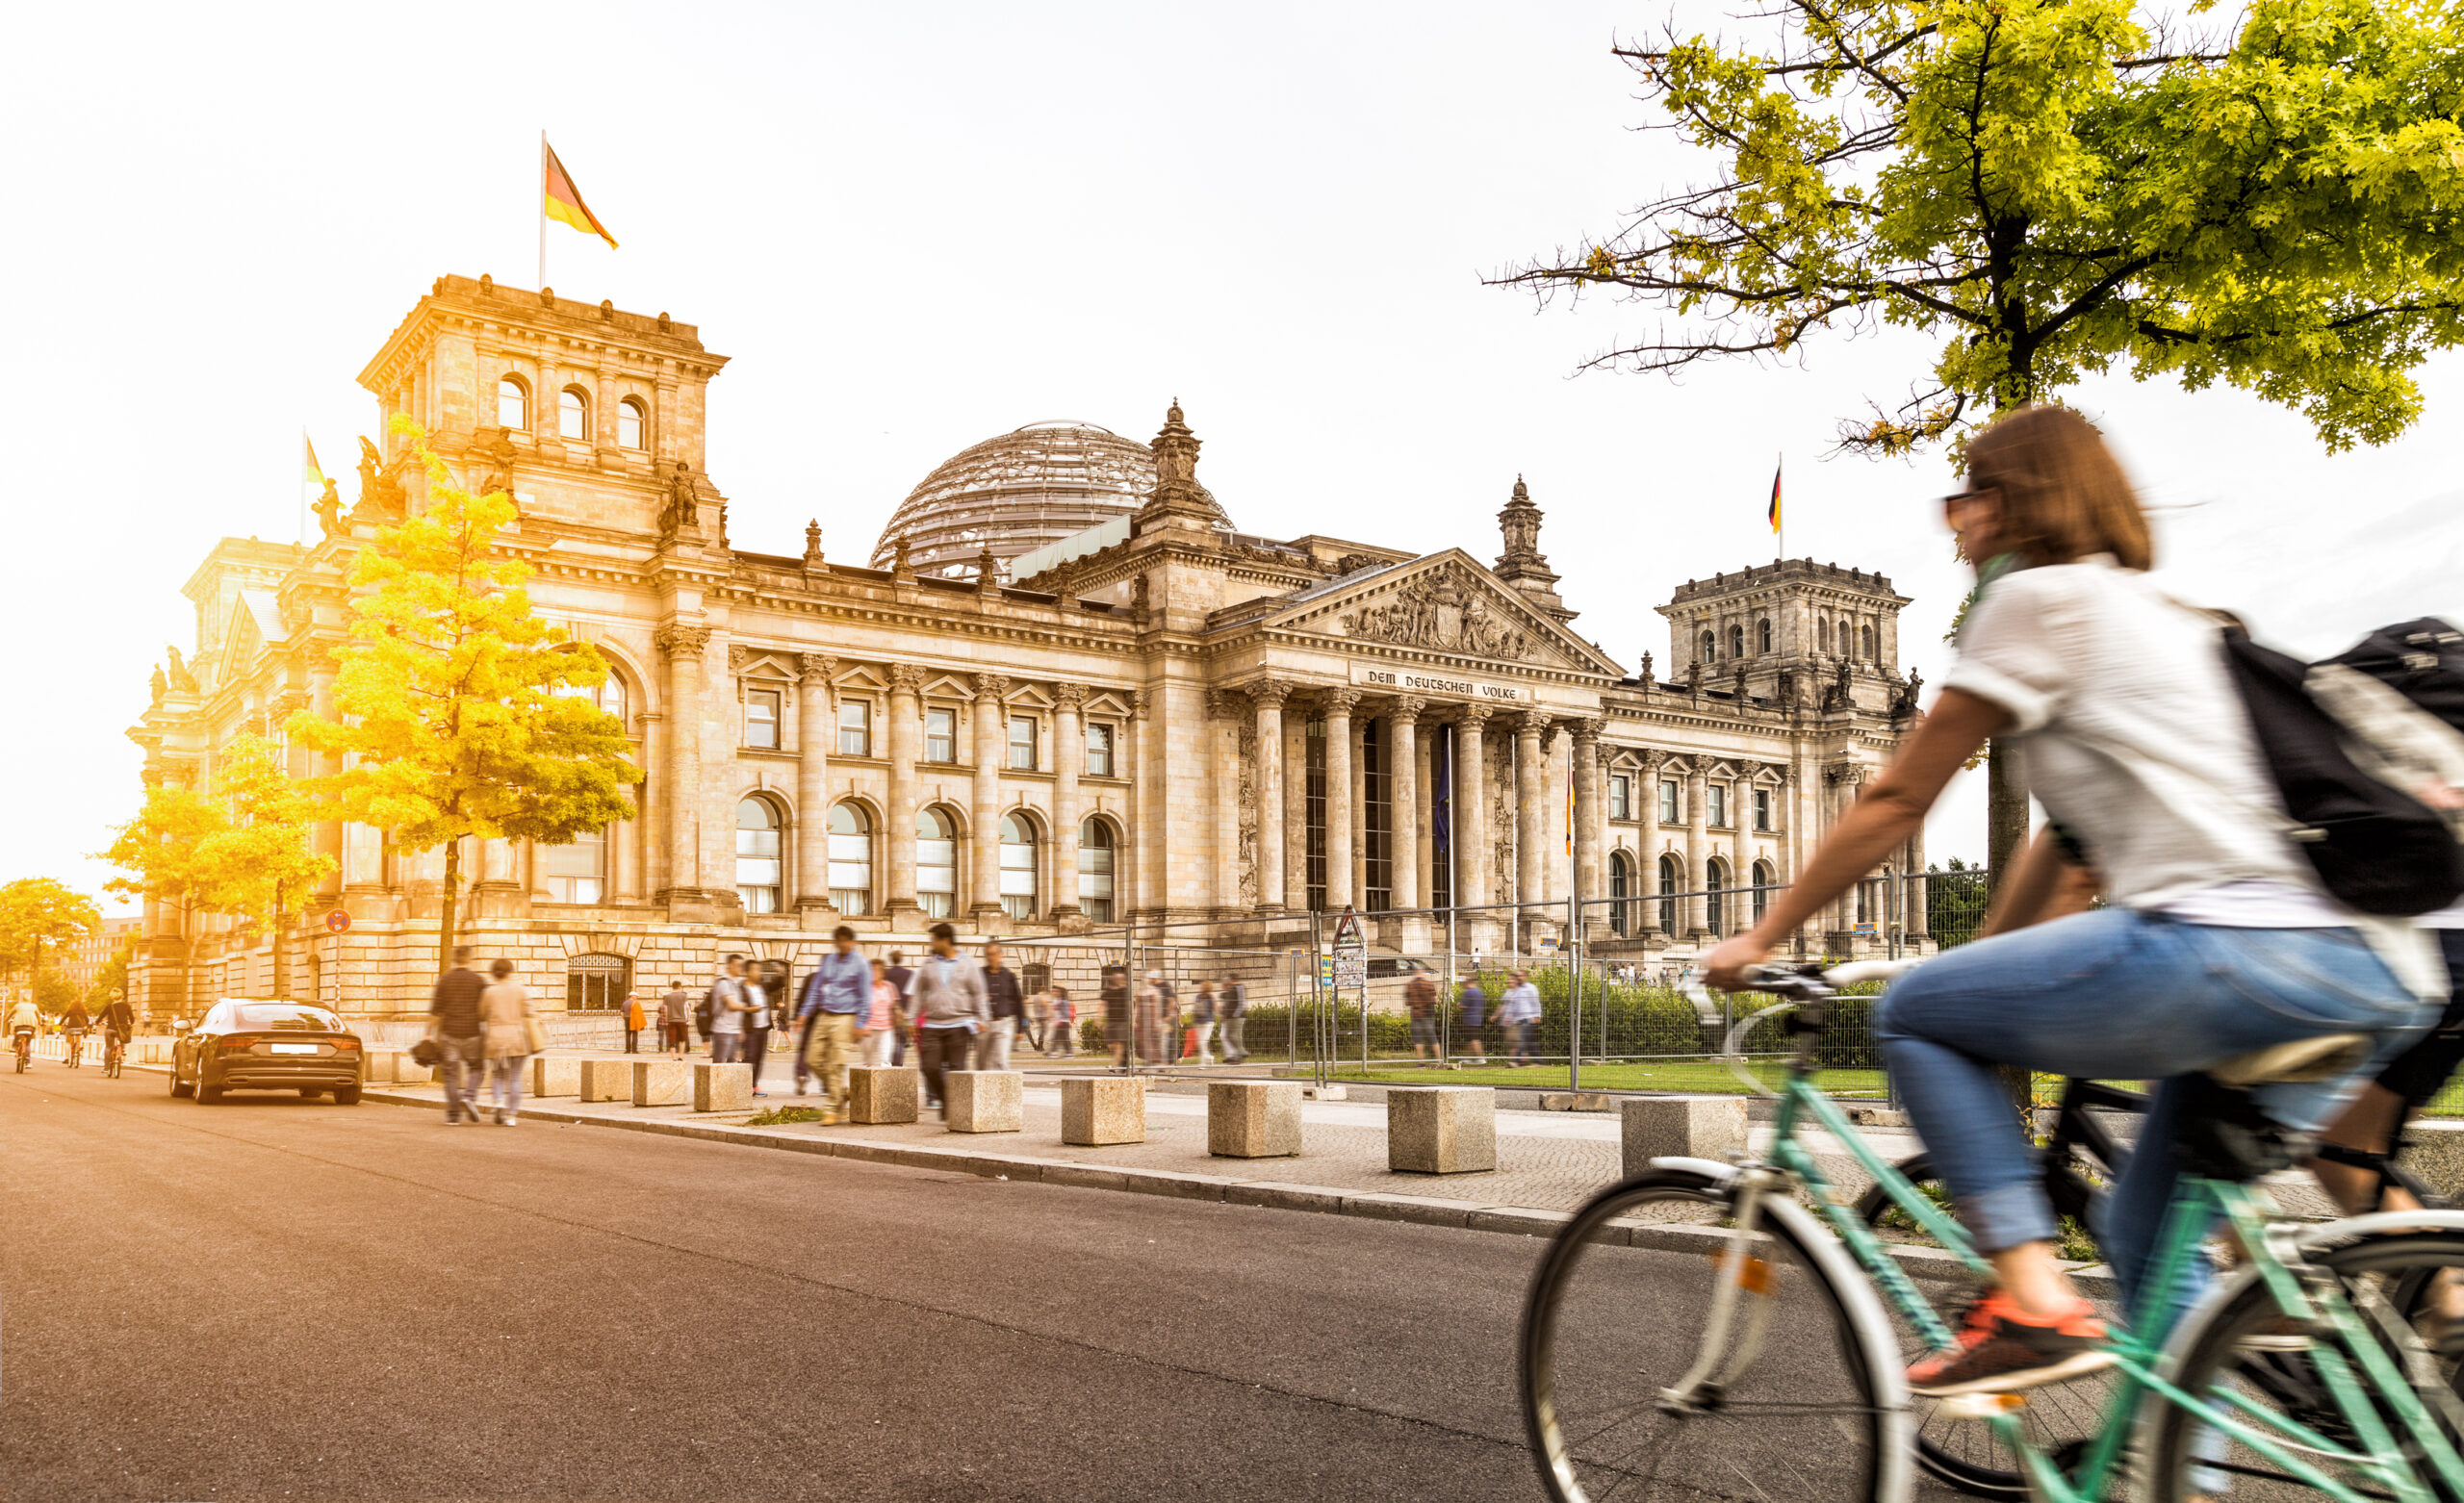 image of berlin germany, with woman riding bike by tree in foreground, large municipal government building in background